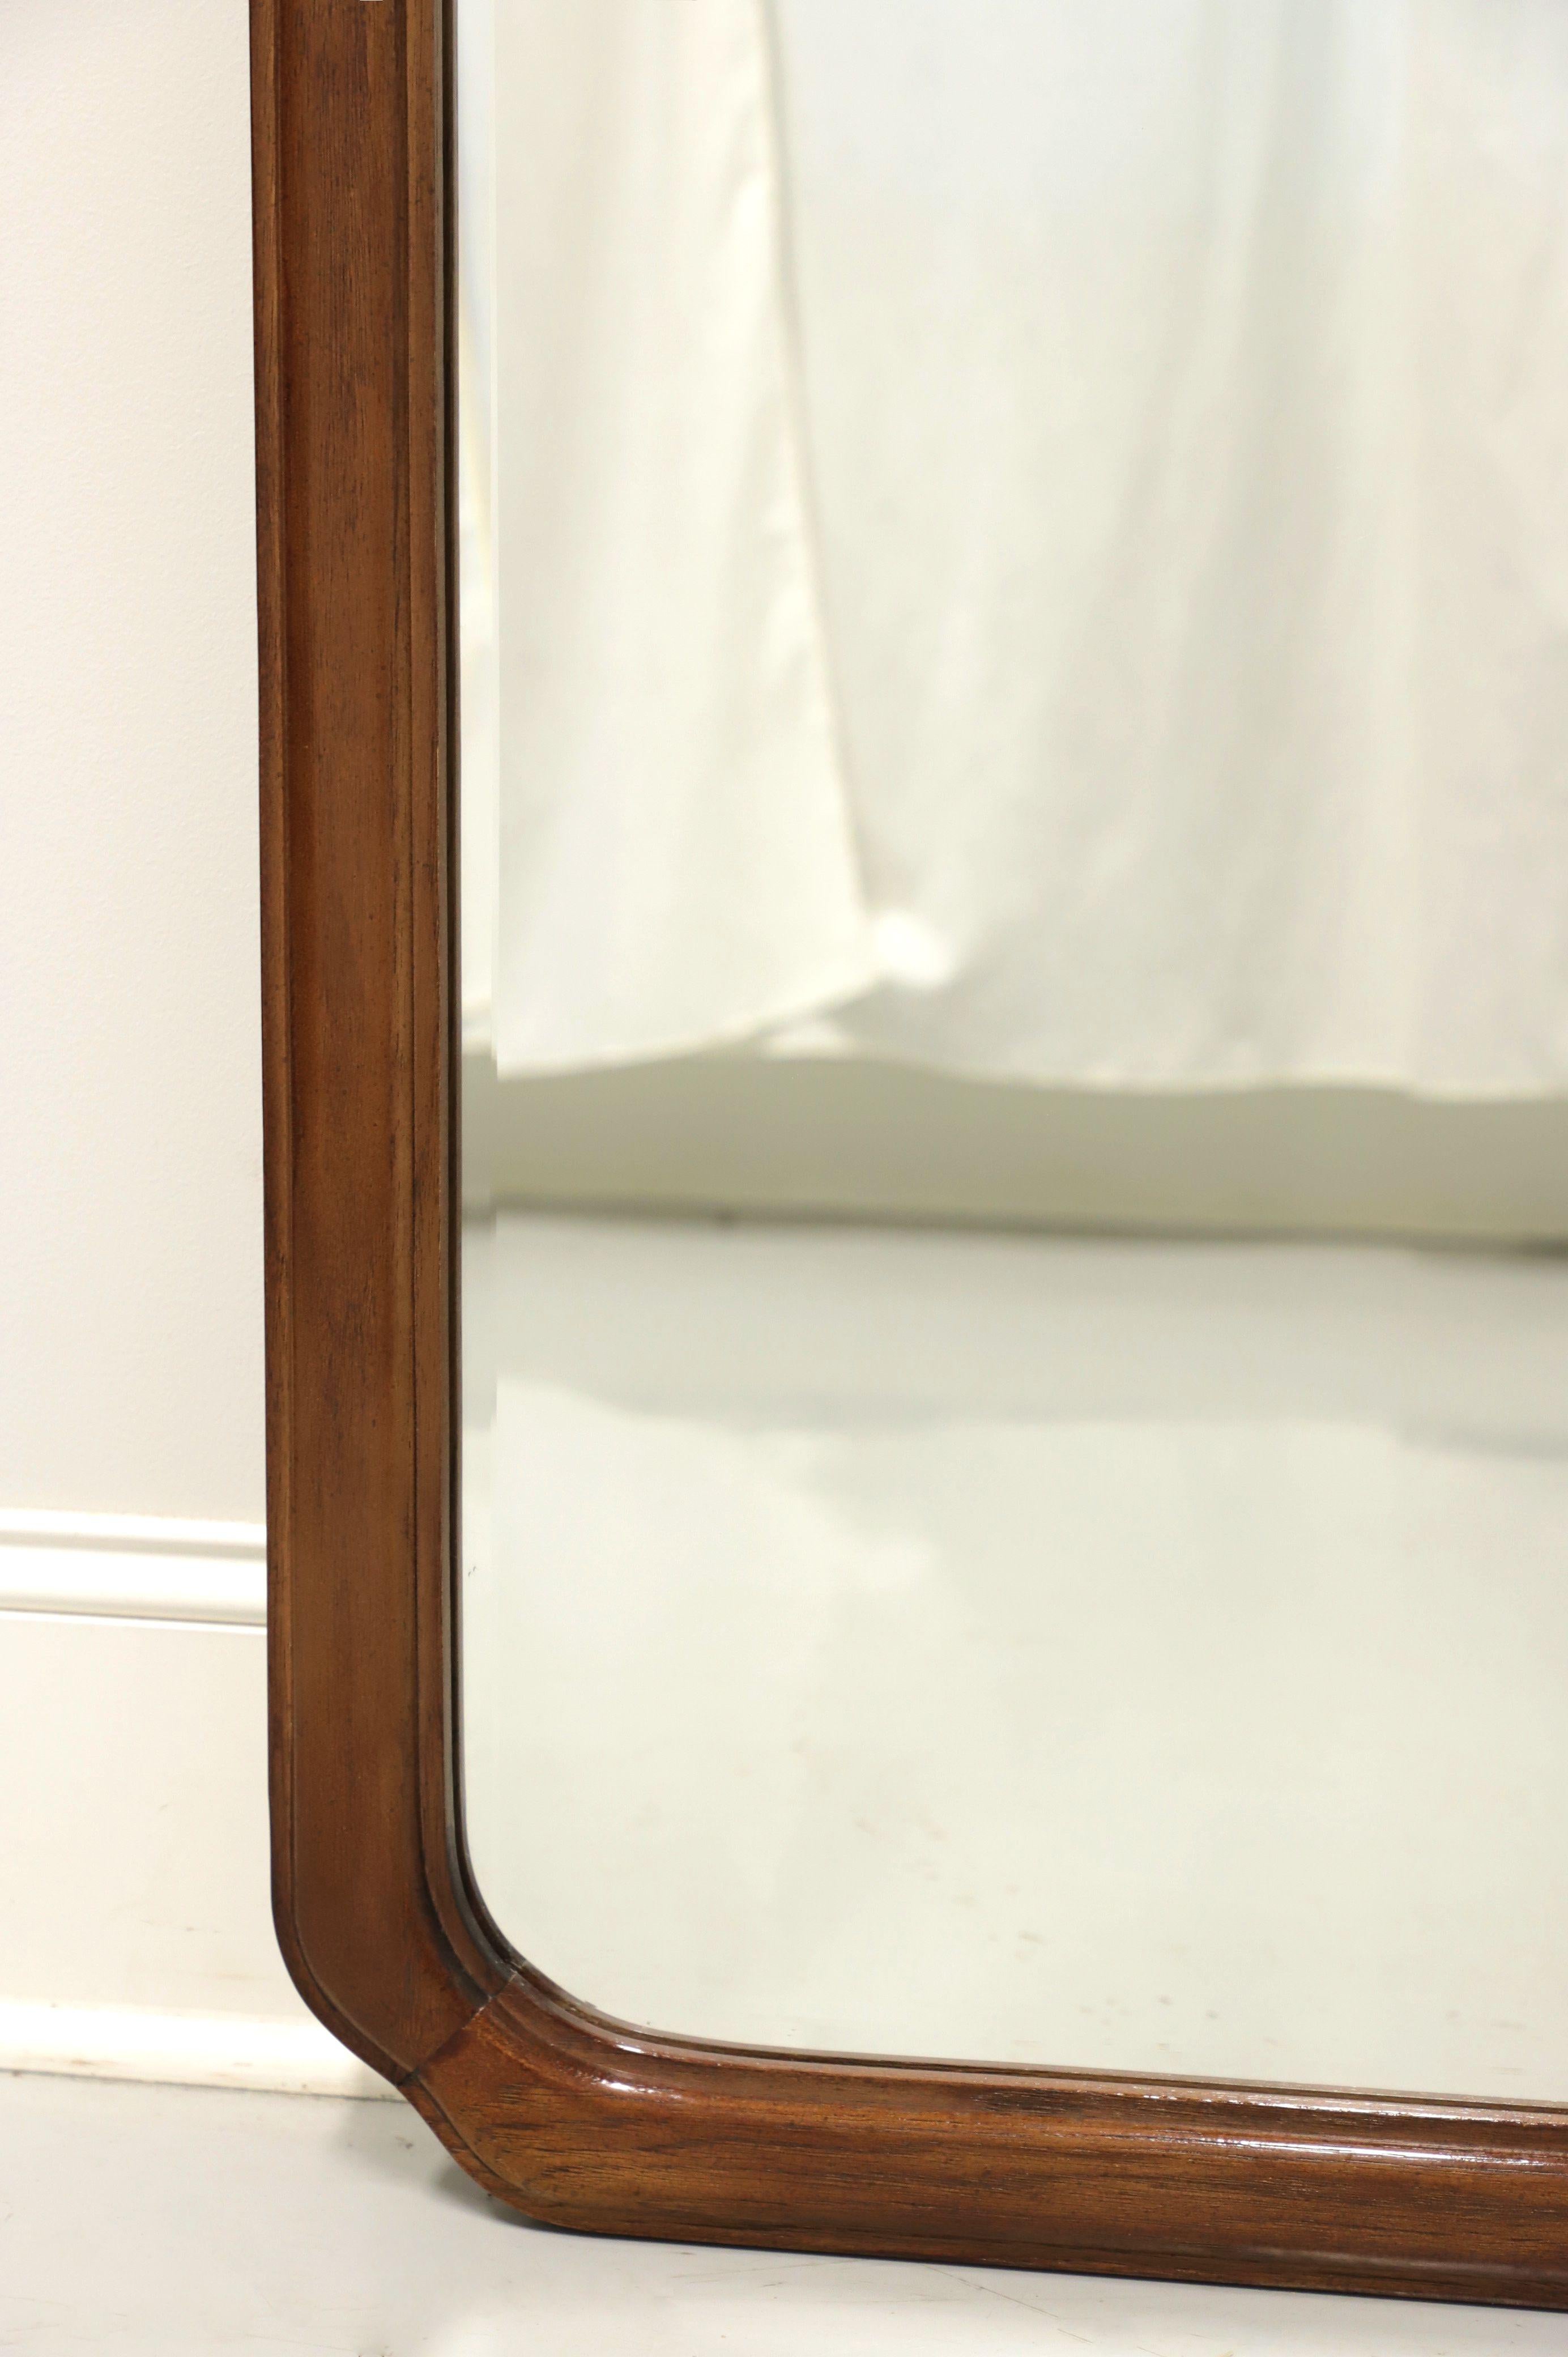 THOMASVILLE Mystique Walnut Asian Influenced Dresser / Wall Mirror In Good Condition For Sale In Charlotte, NC